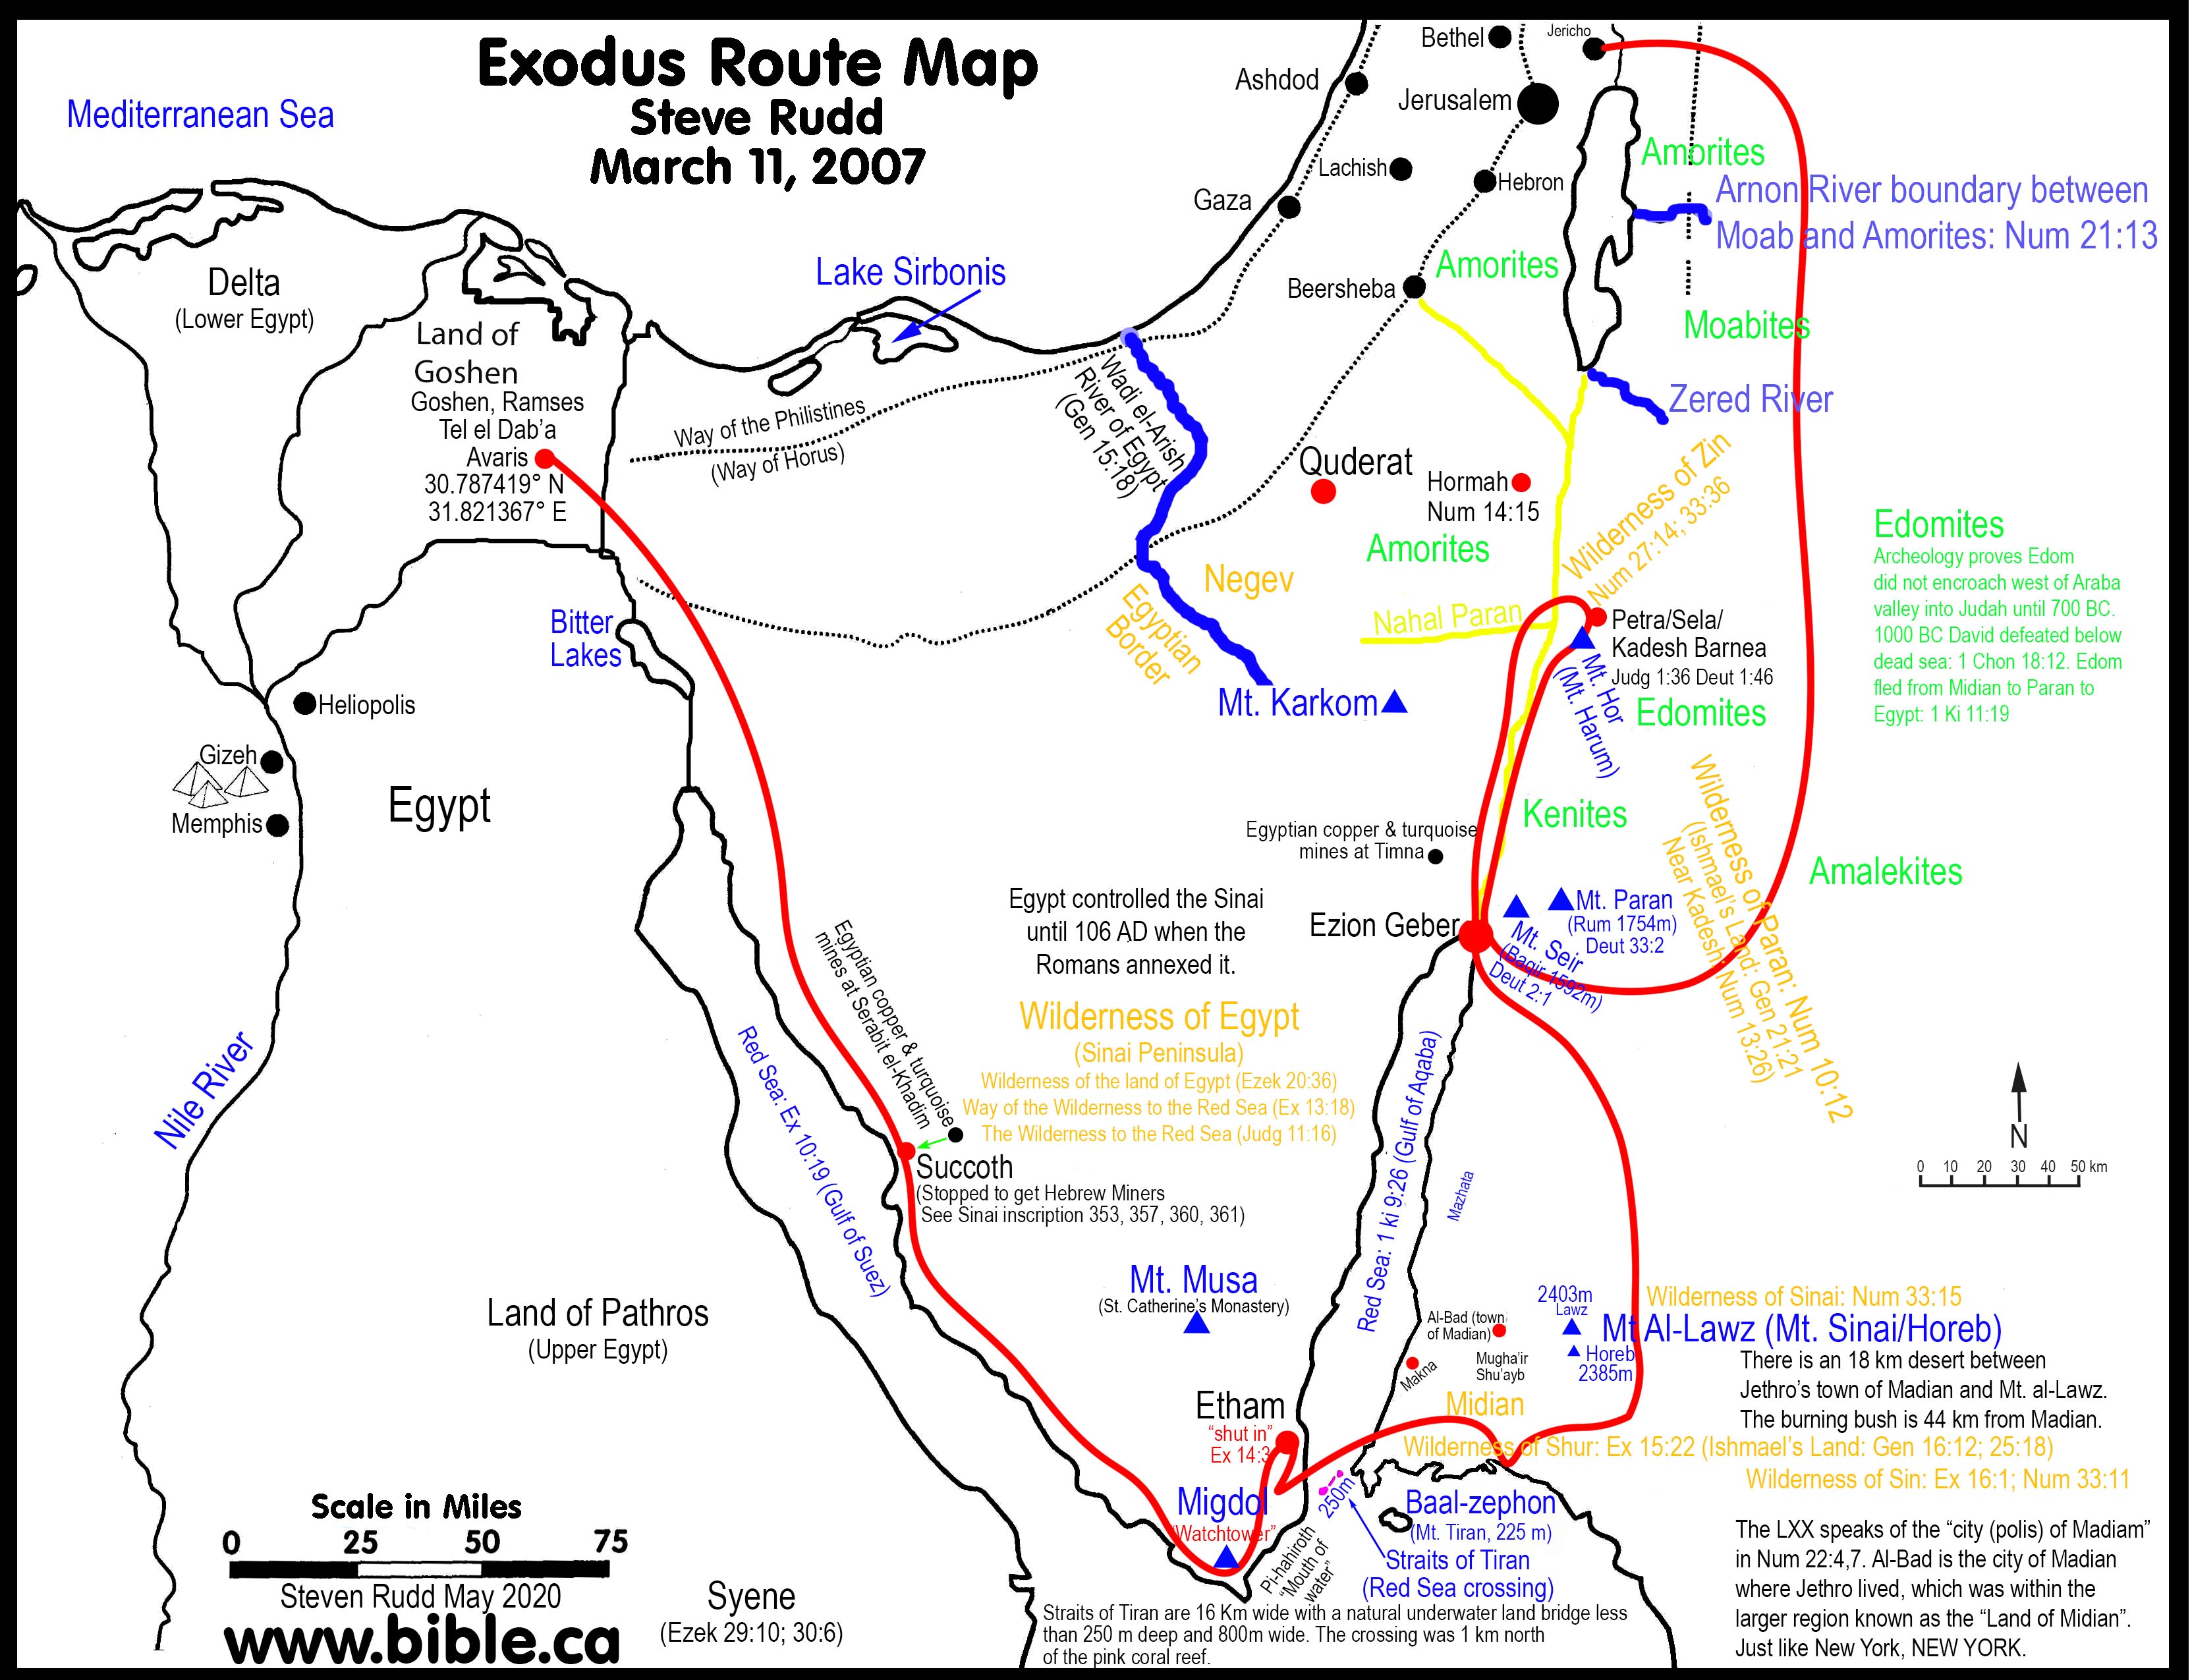 The Exodus Route: Top ten list of reasons why the exodus route was not